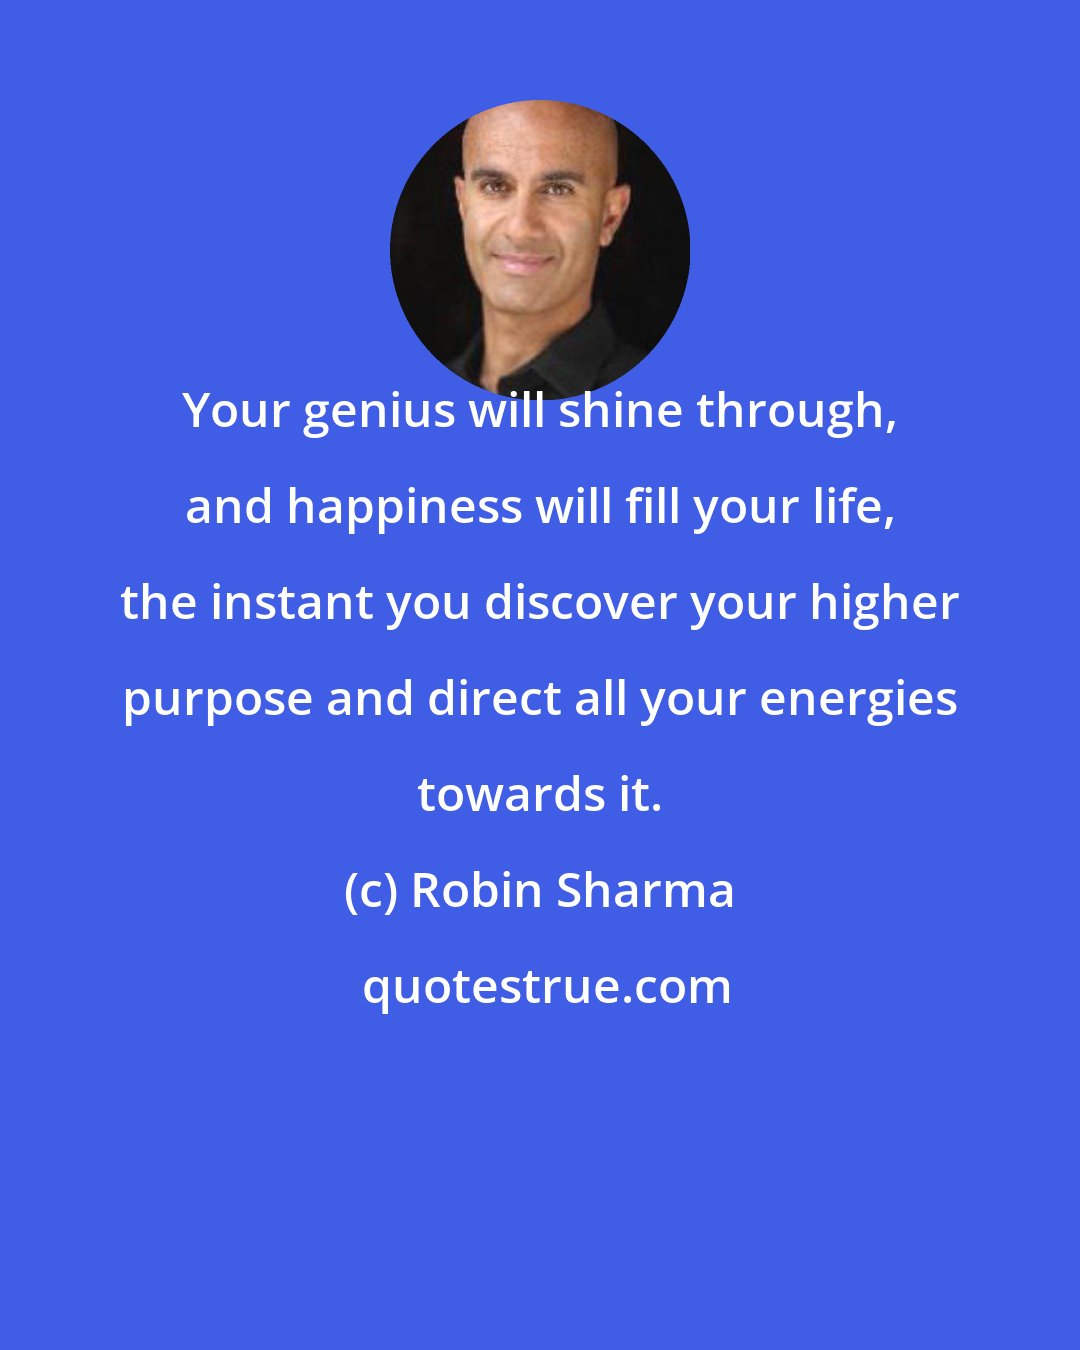 Robin Sharma: Your genius will shine through, and happiness will fill your life, the instant you discover your higher purpose and direct all your energies towards it.